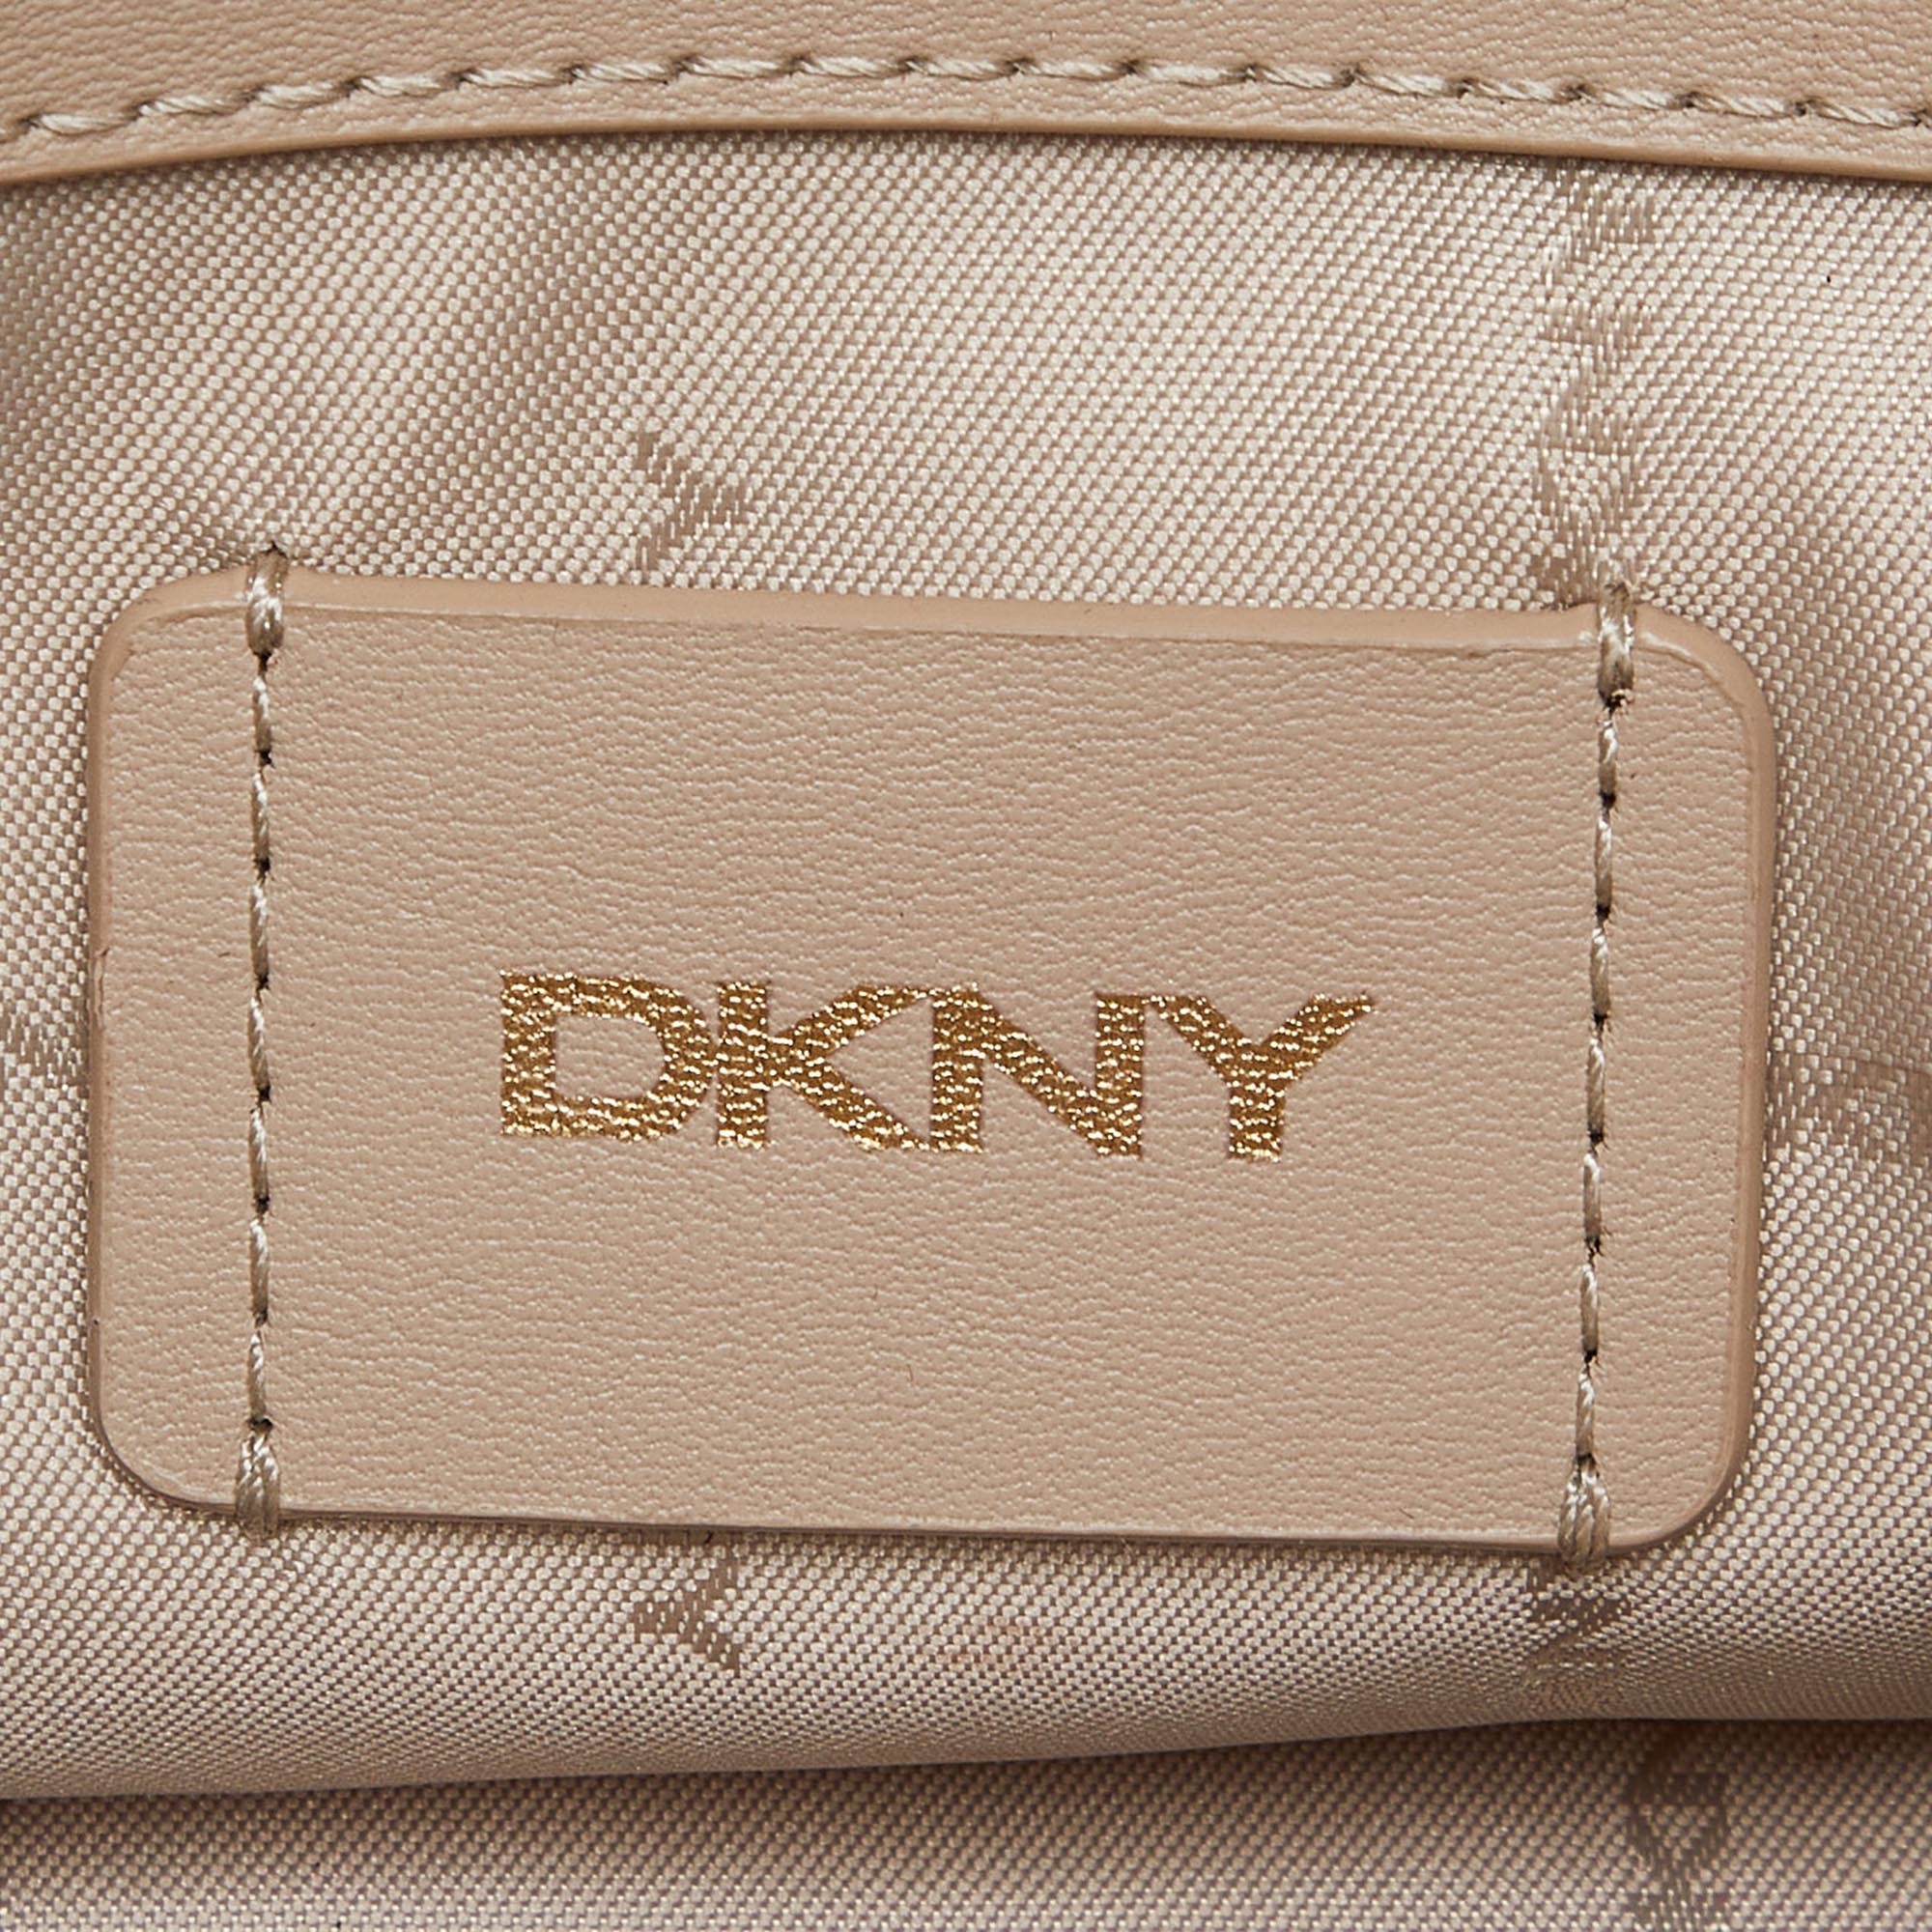 DKNY Tri Color Printed Coated Canvas And Leather Elissa Chain Shoulder Bag